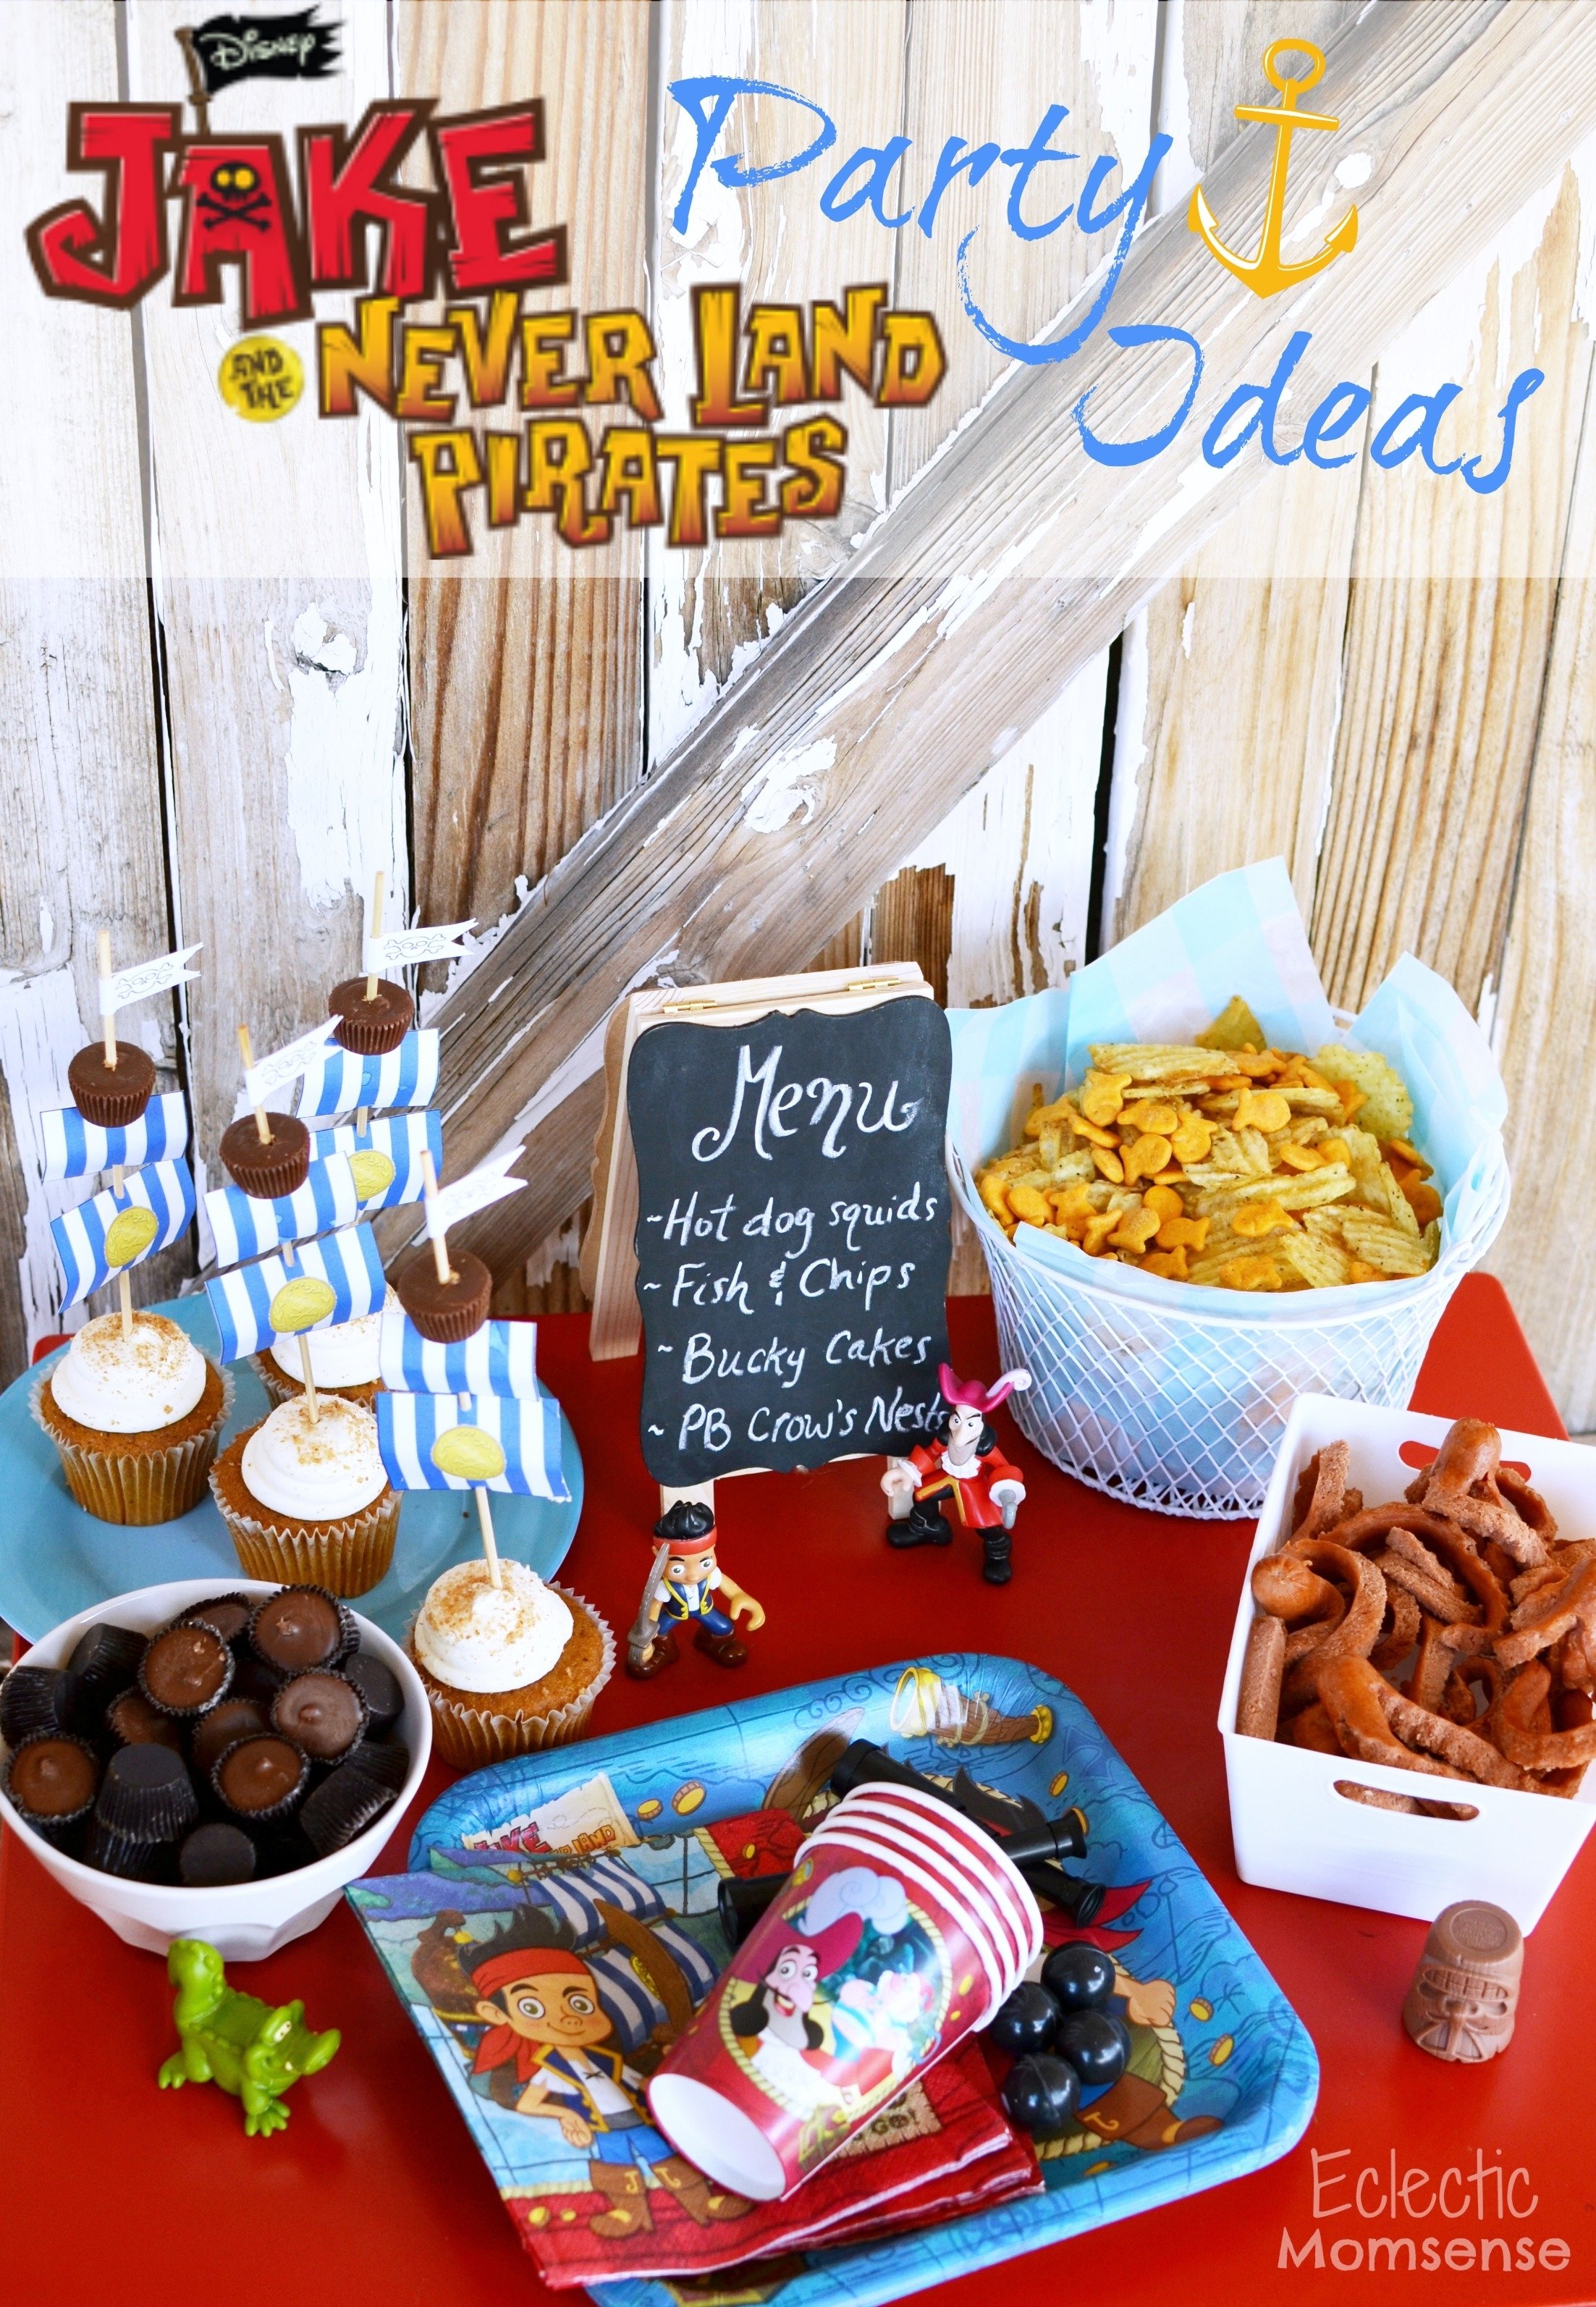 10 Gorgeous Jake And The Neverland Pirates Party Ideas easy jake and the neverland pirates party ideas eclectic momsense 6 2022